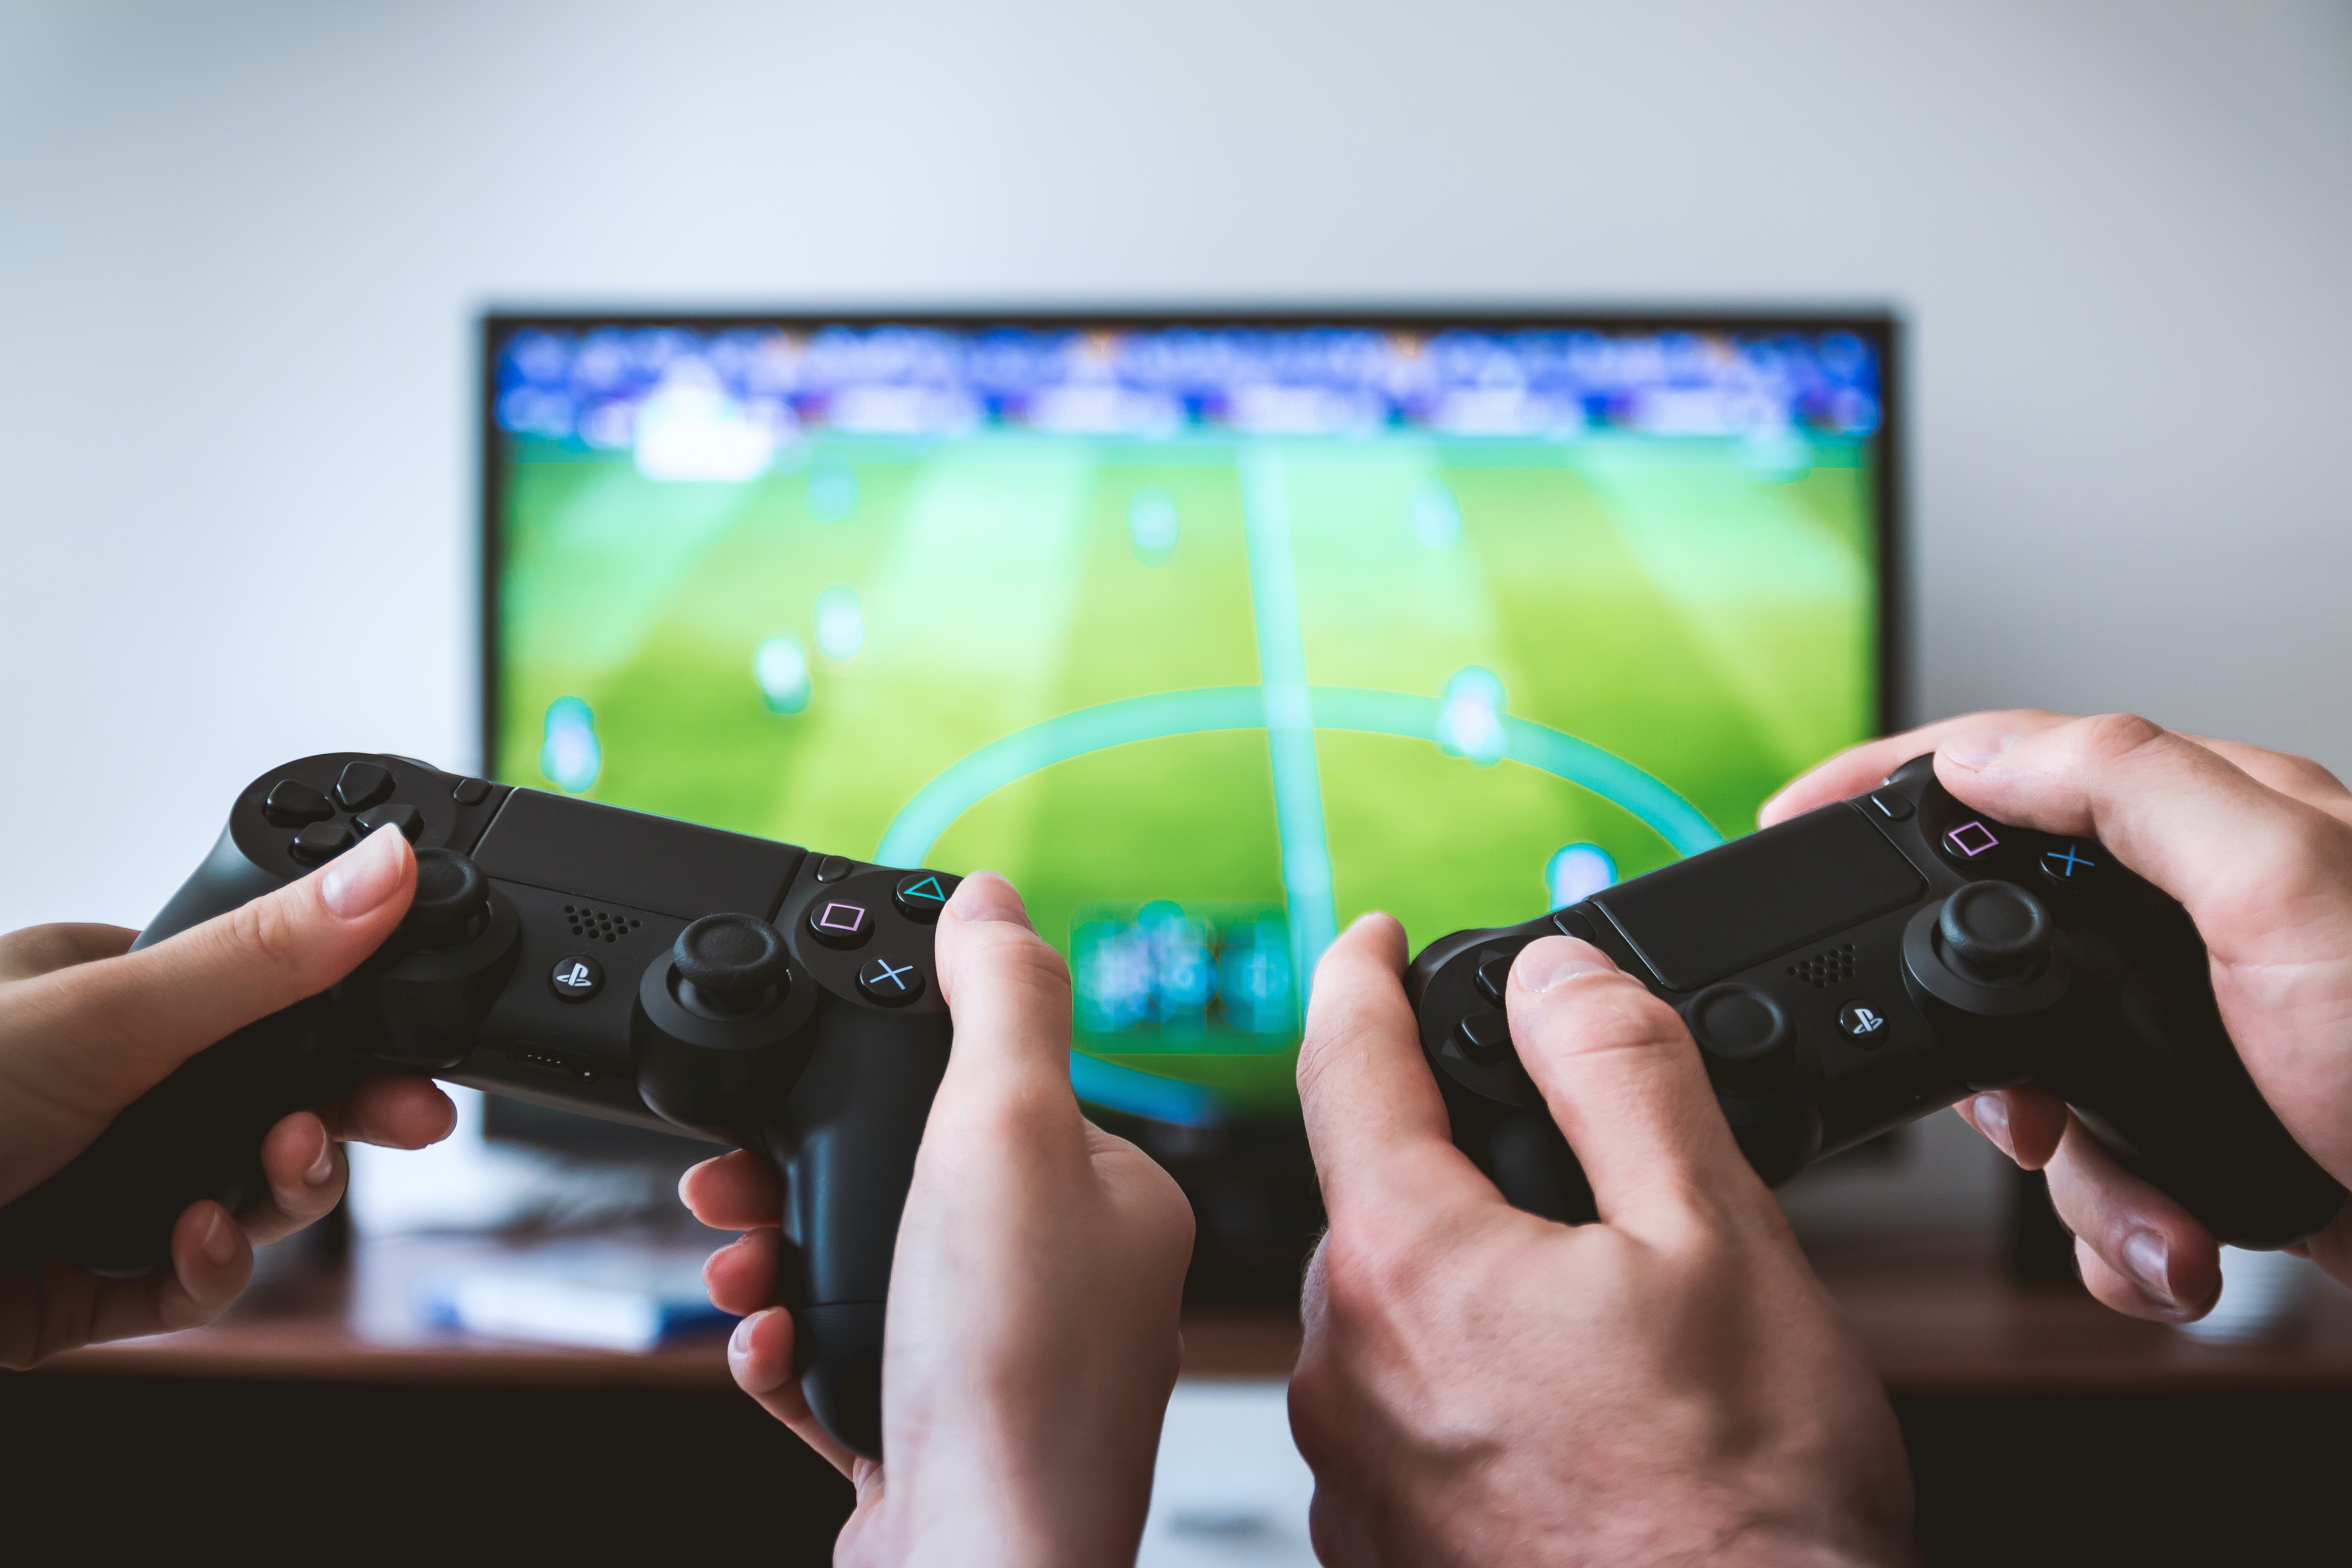 Are There Any Considerations For Guests With Gaming-related Allergies Or Sensitivities?